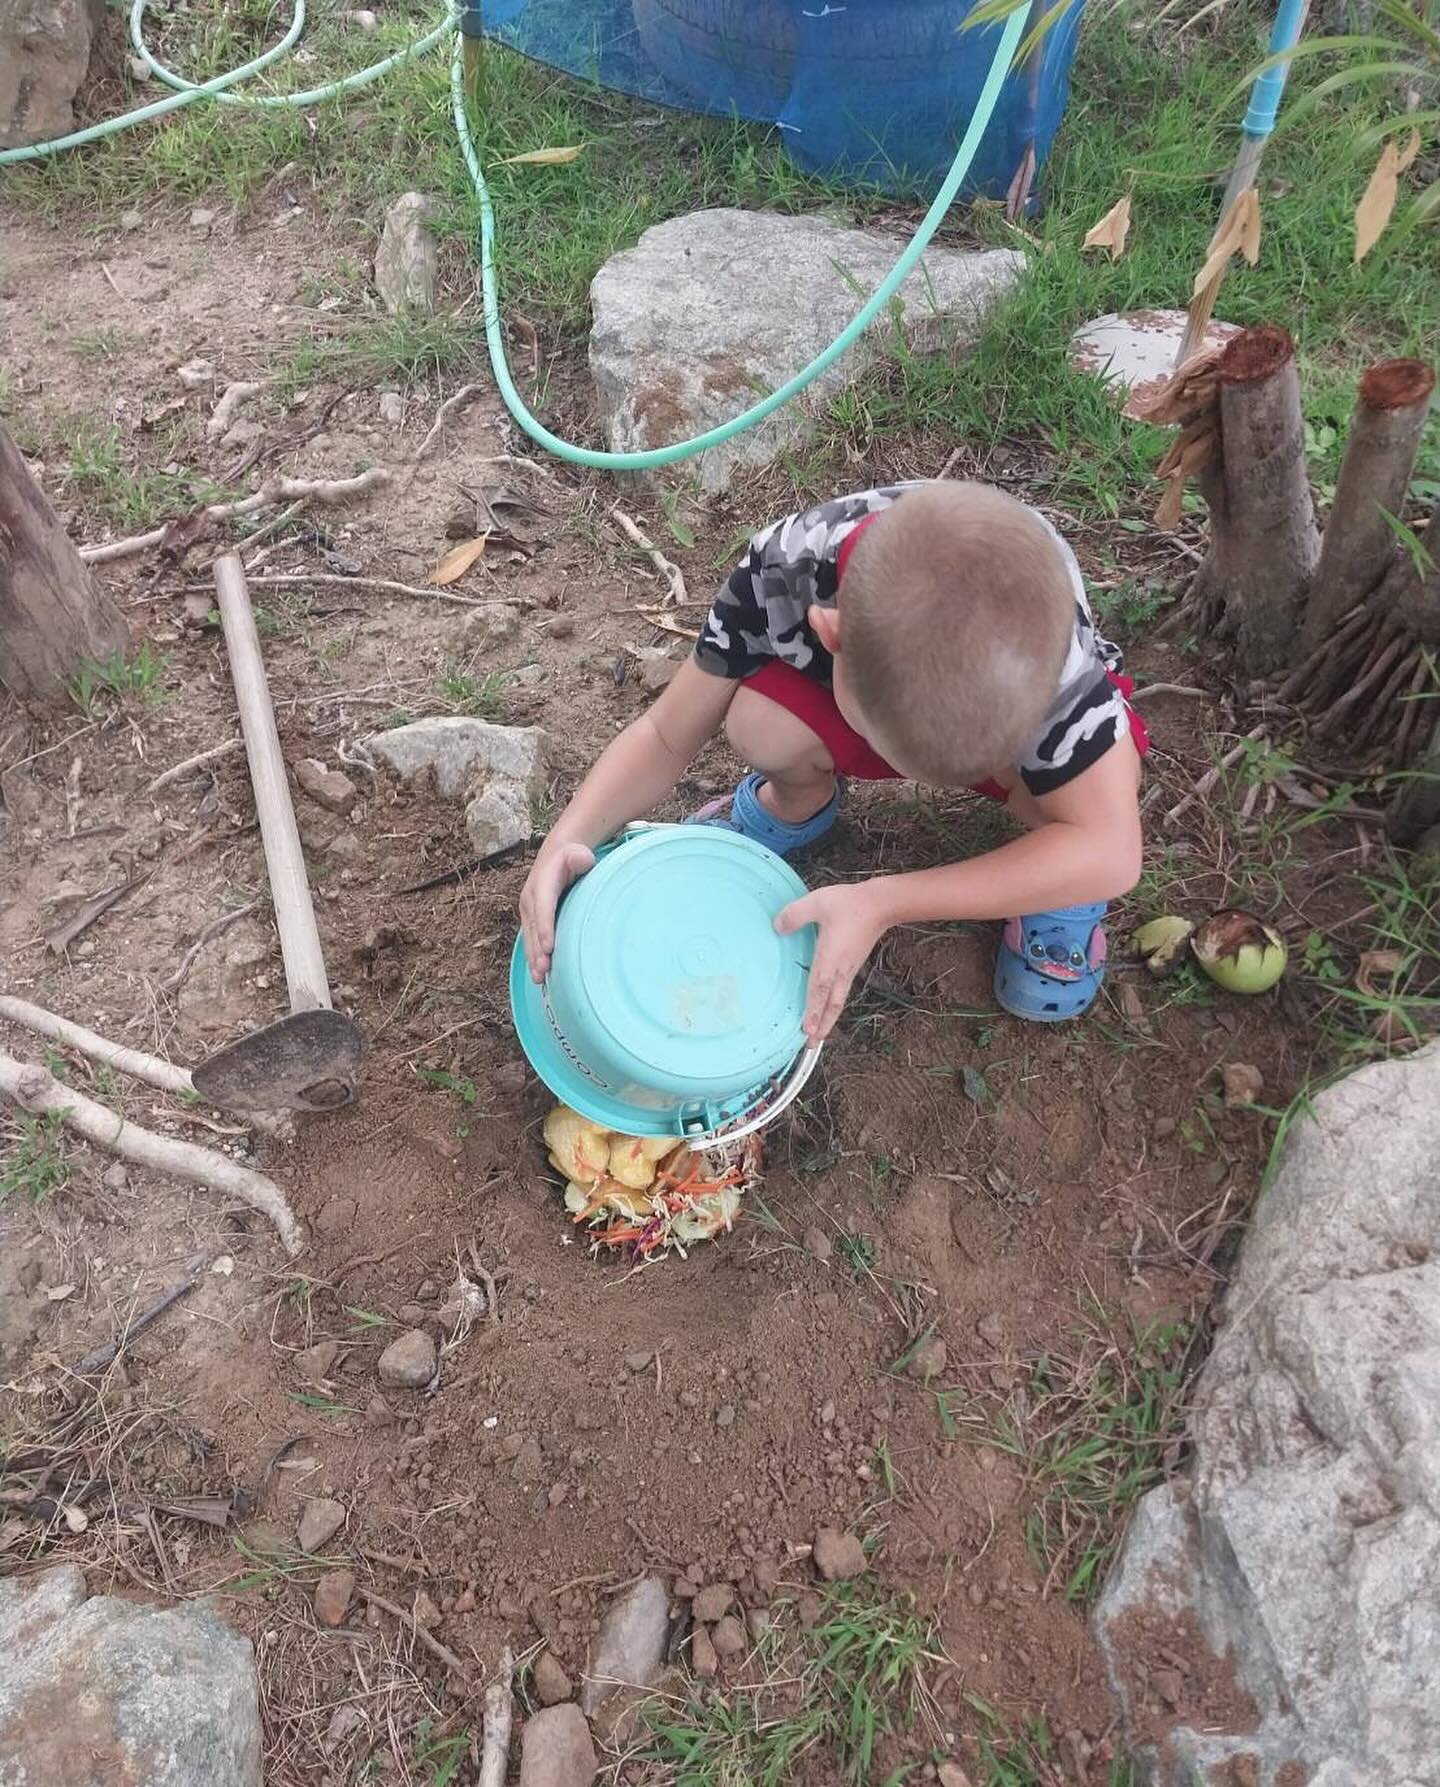 Our Kindergarten students doing practical work in our garden. In this case practising waste disposal by landfill.

#MontessoriHousePhuket
#Montessori
#MontessoriPhuket
#MontessoriThailand
#MontessoriSchool
#InternationalSchool
#PhuketInternationalSch